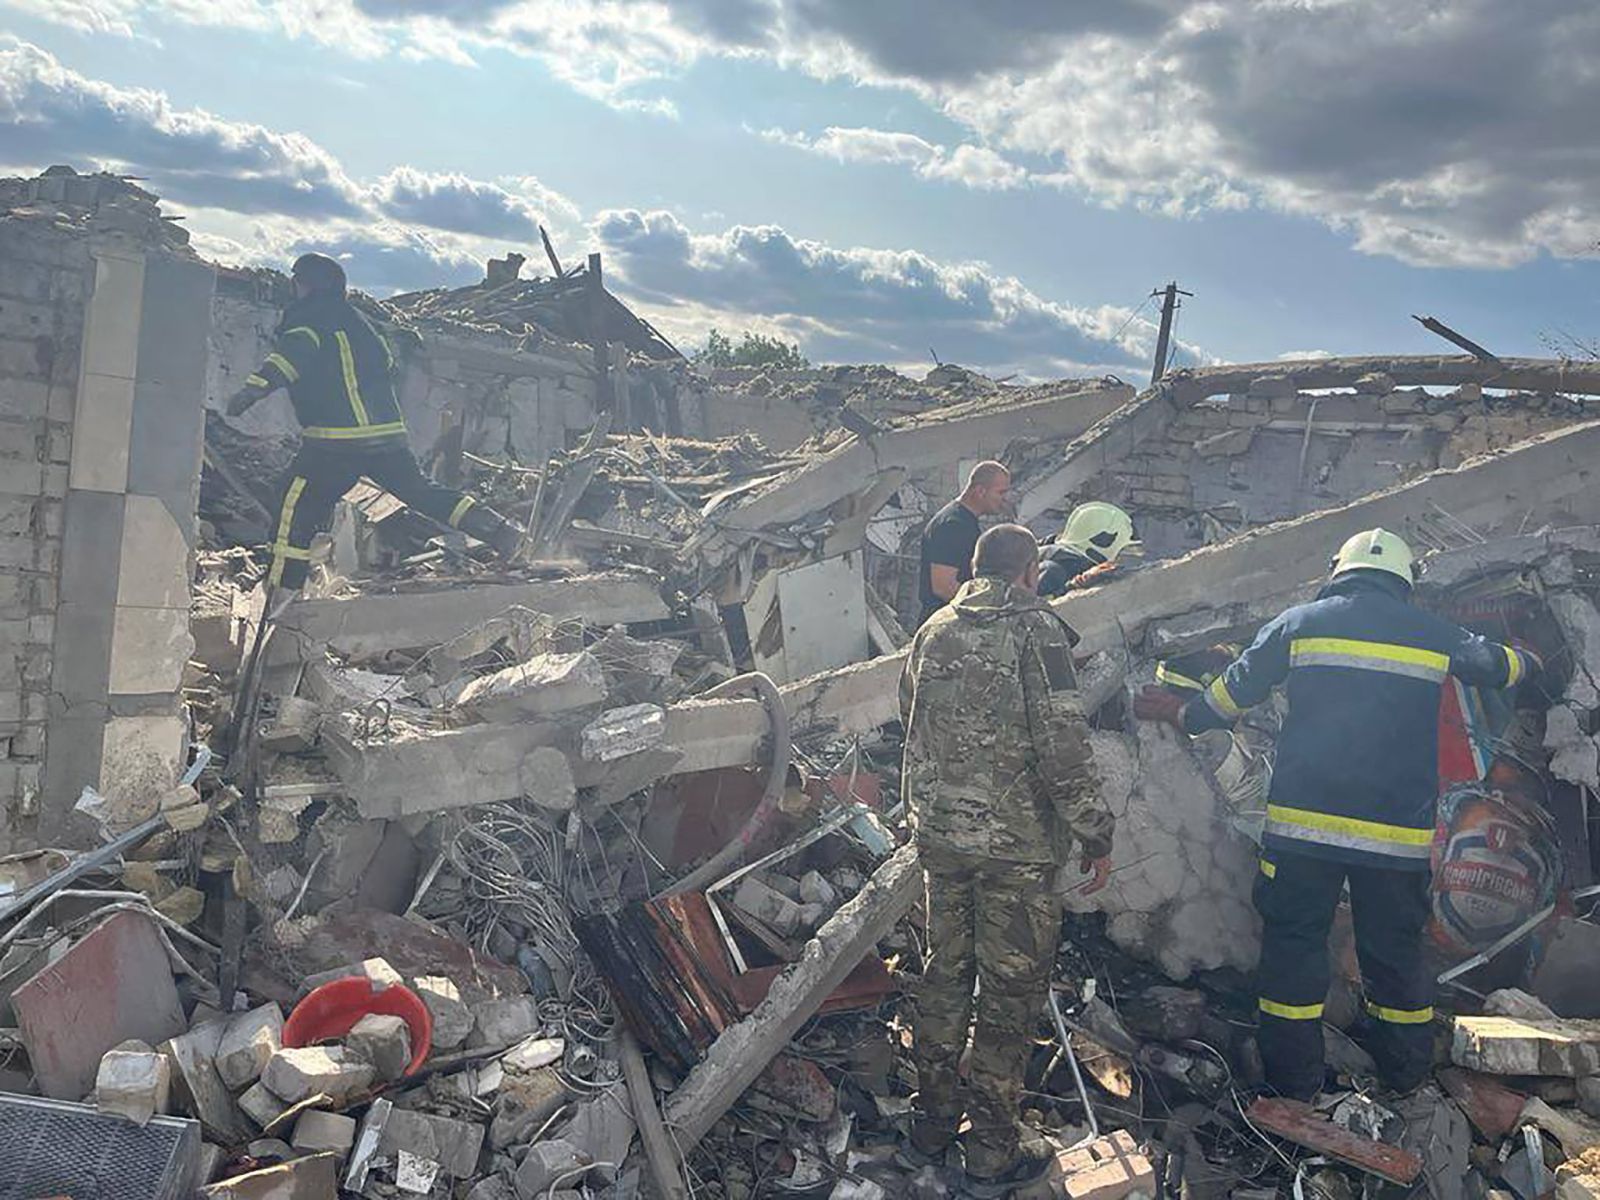 epa10901601 A handout photo made available by the Head of the Office of the President of Ukraine Andriy Yermak via telegram shows rescuers working at the site after shelling hit the village of Hroza, Kupiansk district, Kharkiv region, northeastern Ukraine, 05 October 2023, amid the Russian invasion. At least 48 were killed, including a six-year-old child, and six others were injured, including a young girl, after a Russian missile 'hit a civilian object' in the village of Hroza, Kupiansk district, the head of Ukraine's Presidential Office Andriy Yermak wrote on telegram.  EPA/Head of Ukraine's Presidential Office Andriy Yermak HANDOUT -- BEST QUALITY AVAILABLE -- HANDOUT EDITORIAL USE ONLY/NO SALES